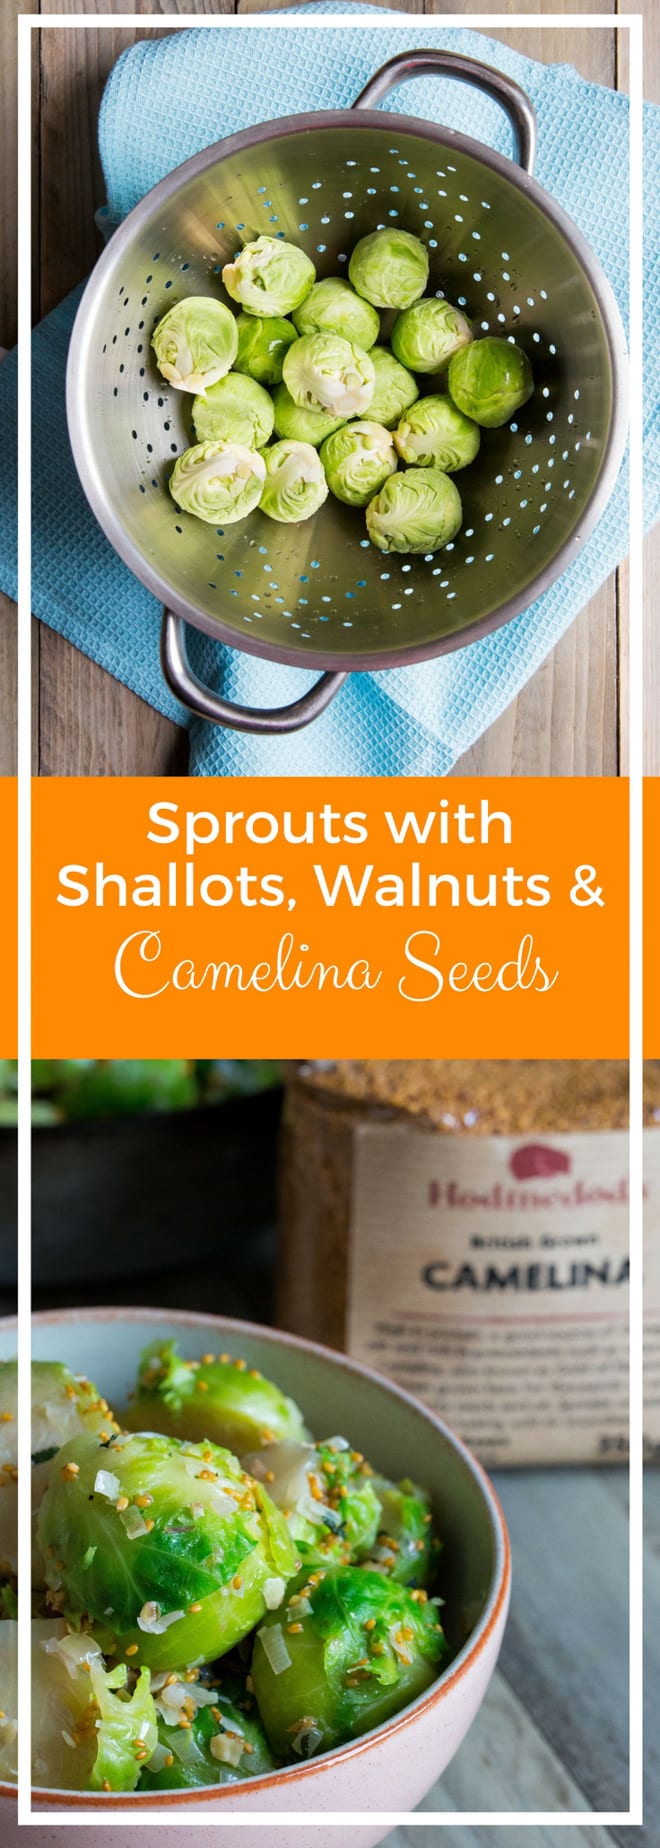 Sprouts with Walnuts and Shallots - fantastic holiday side dish for sprout lovers! Nuttied up with crunchy walnuts and lovely little camelina seeds from Hodmedods | thecookandhim.com